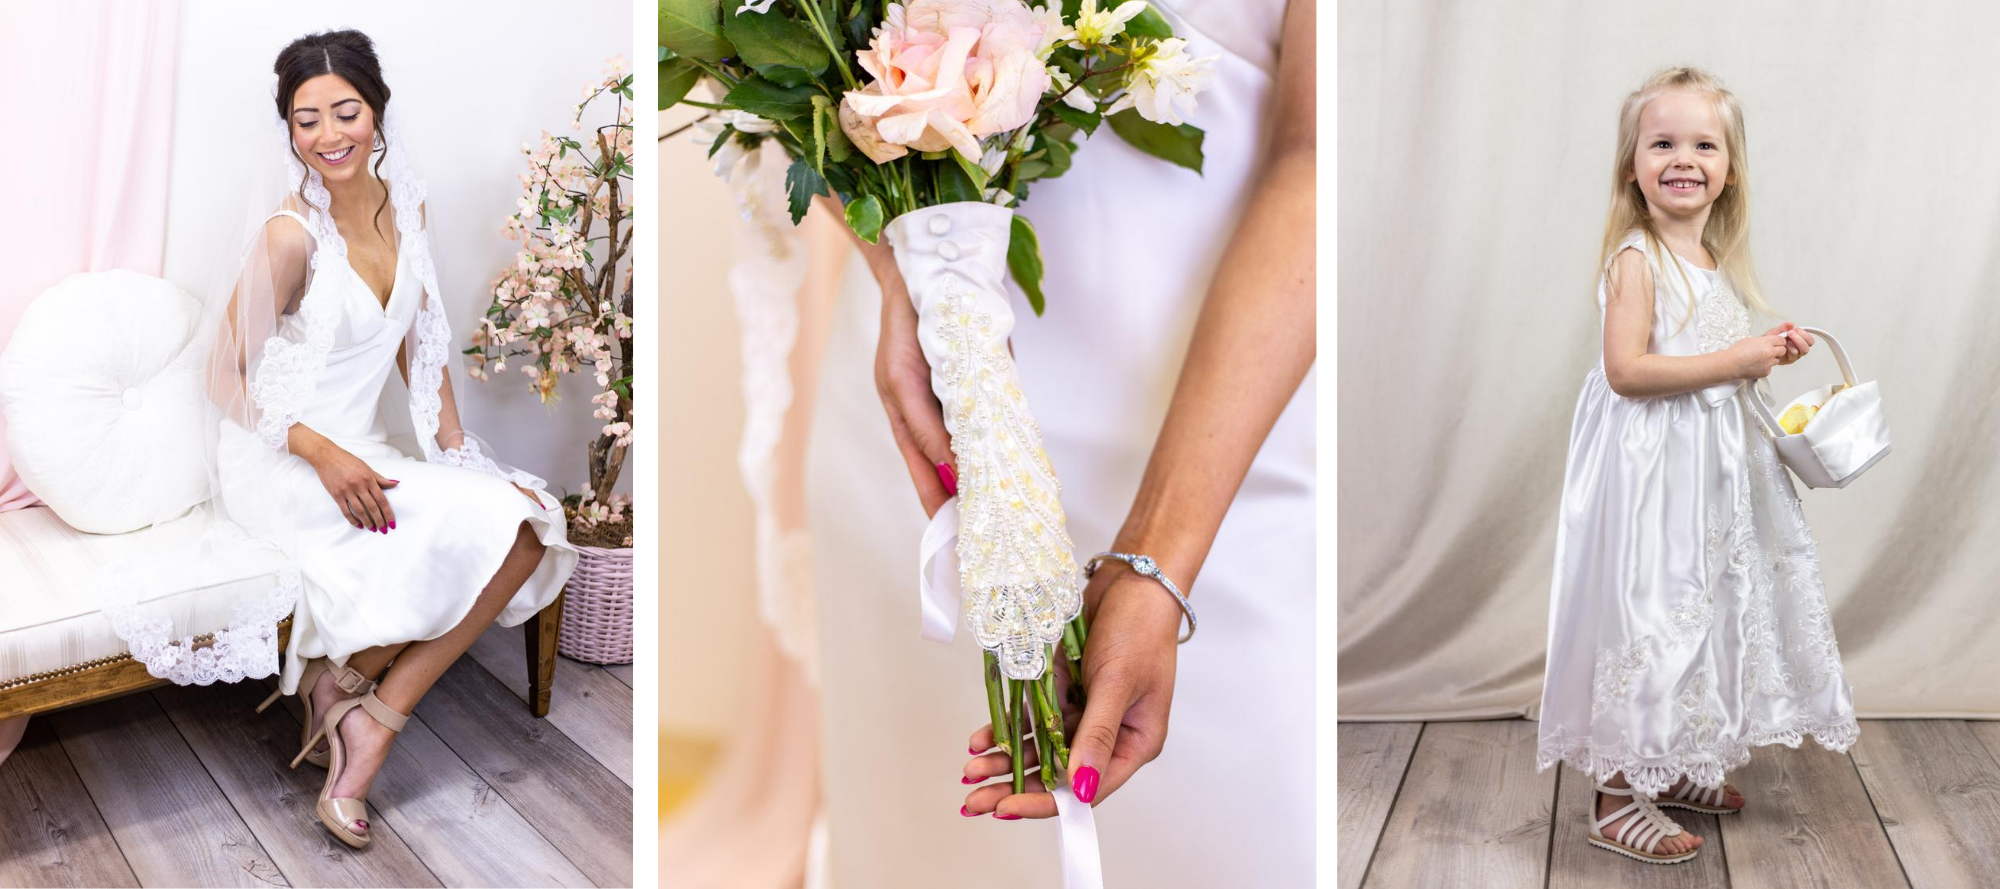 8 Ways to Incorporate Mom or Grandma's Dress into Your Wedding ...